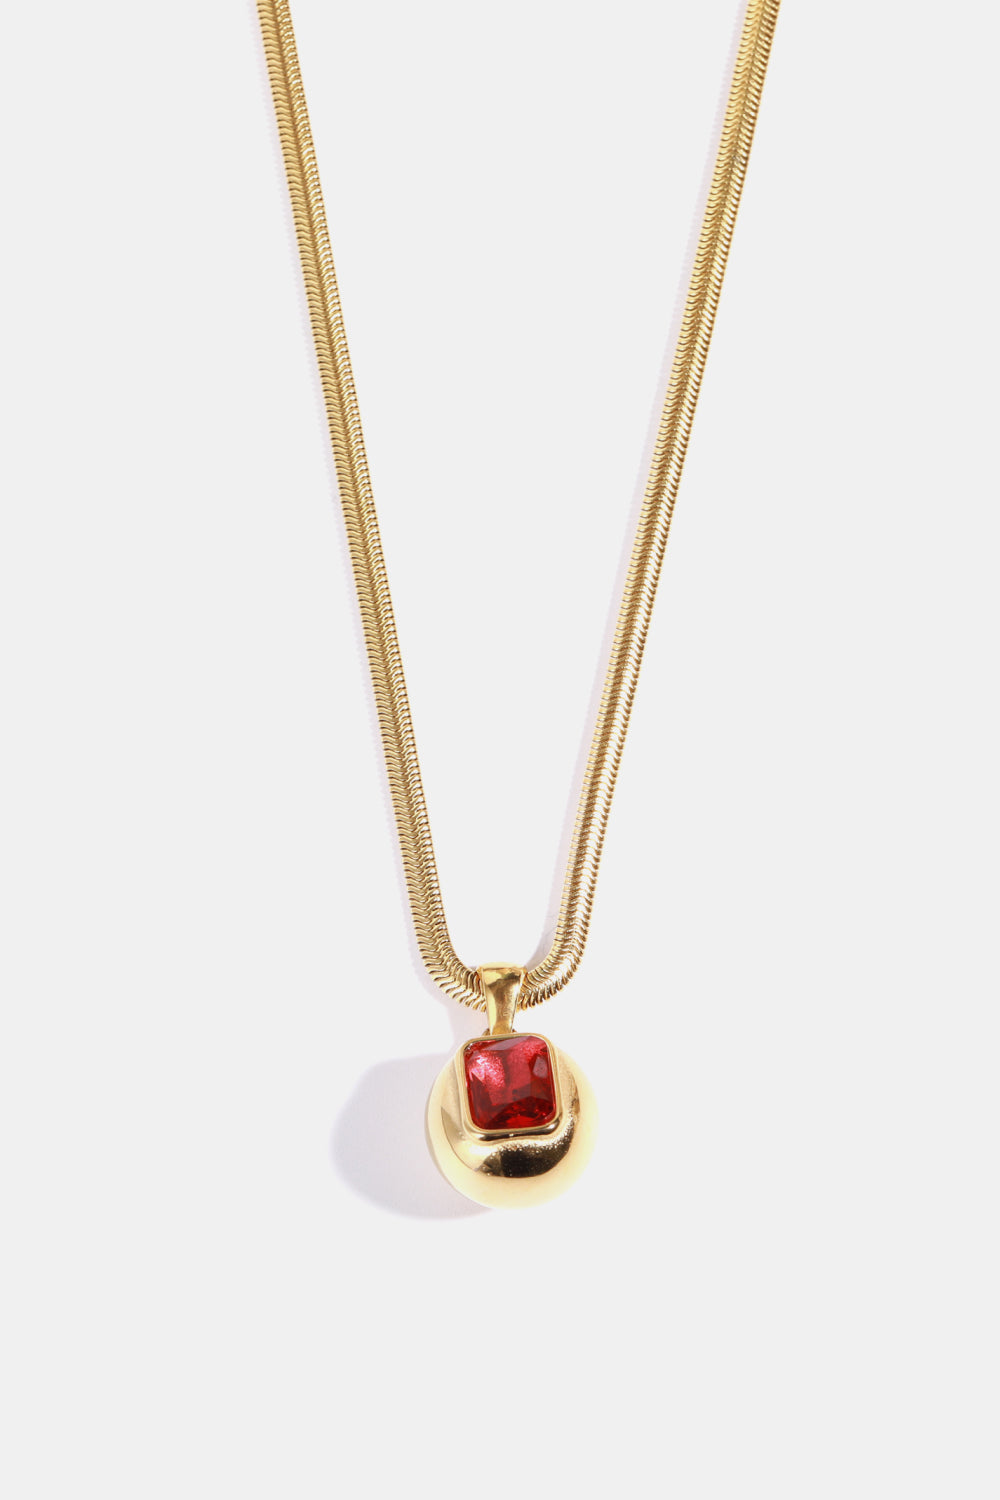 Trendsi Cupid Beauty Supplies Deep Red / One Size Women Necklace Zircon 18K Gold-Plated Geometrical Shape Pendant Necklace